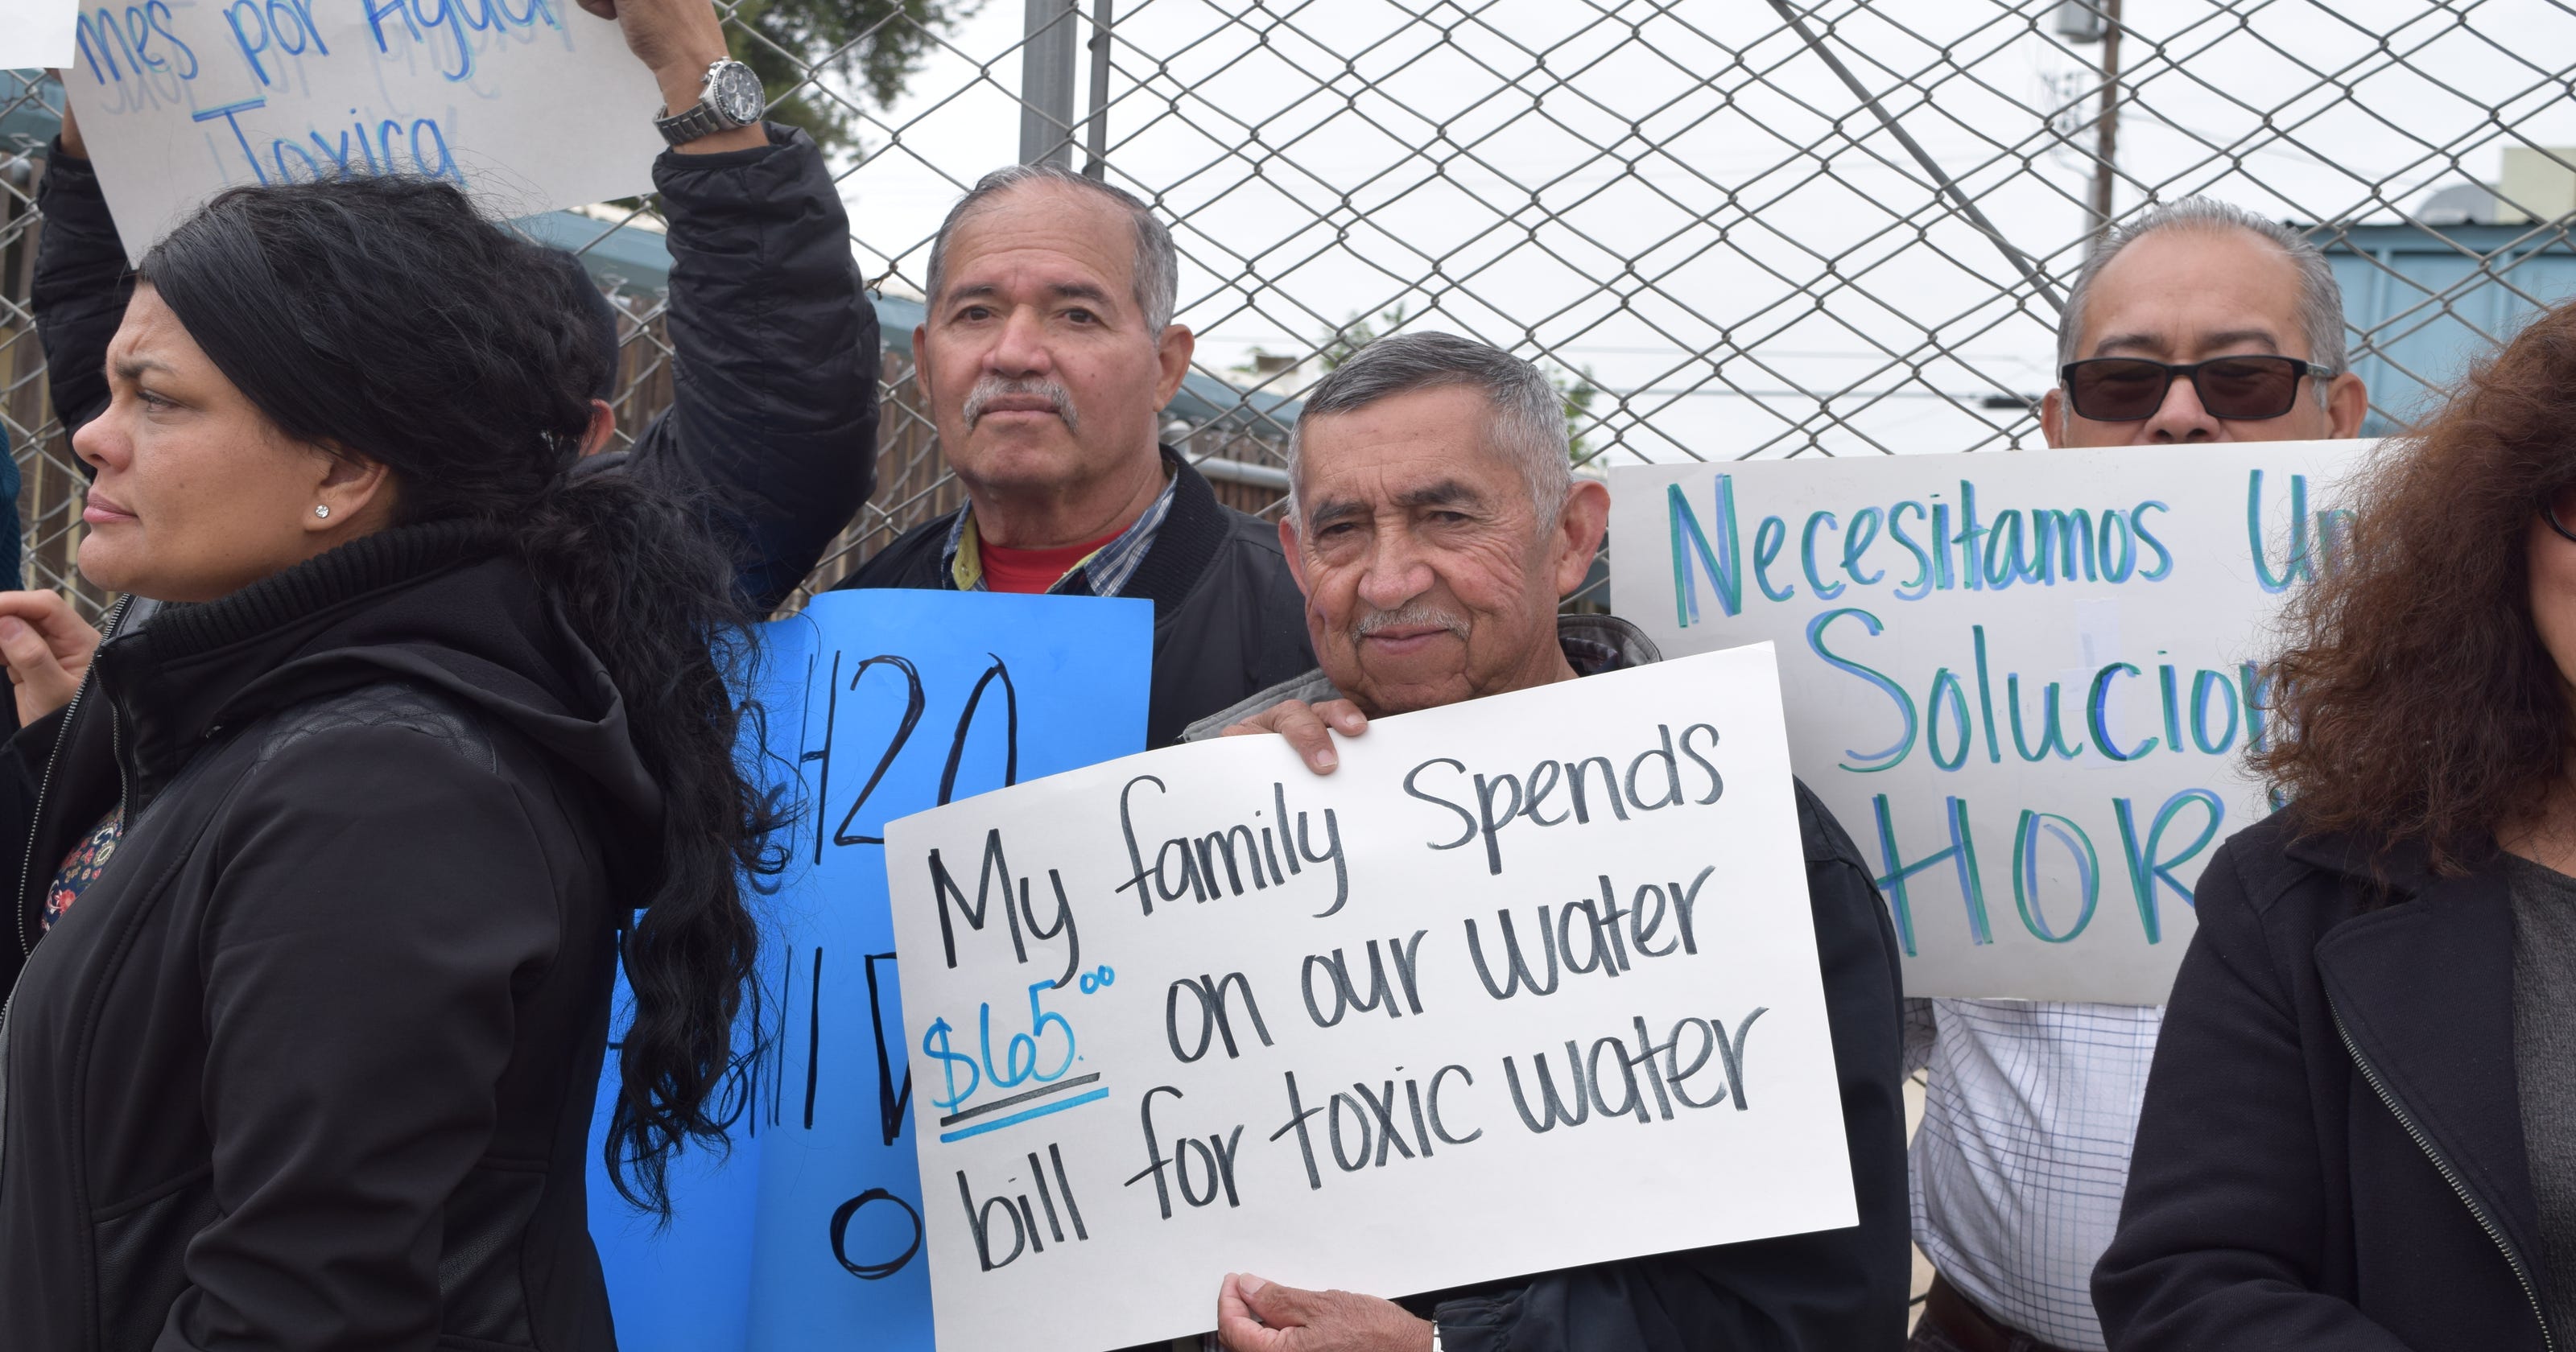 Commentary: It’s time to deliver on human right to clean, affordable water - Visalia Times-Delta and Tulare Advance-Register